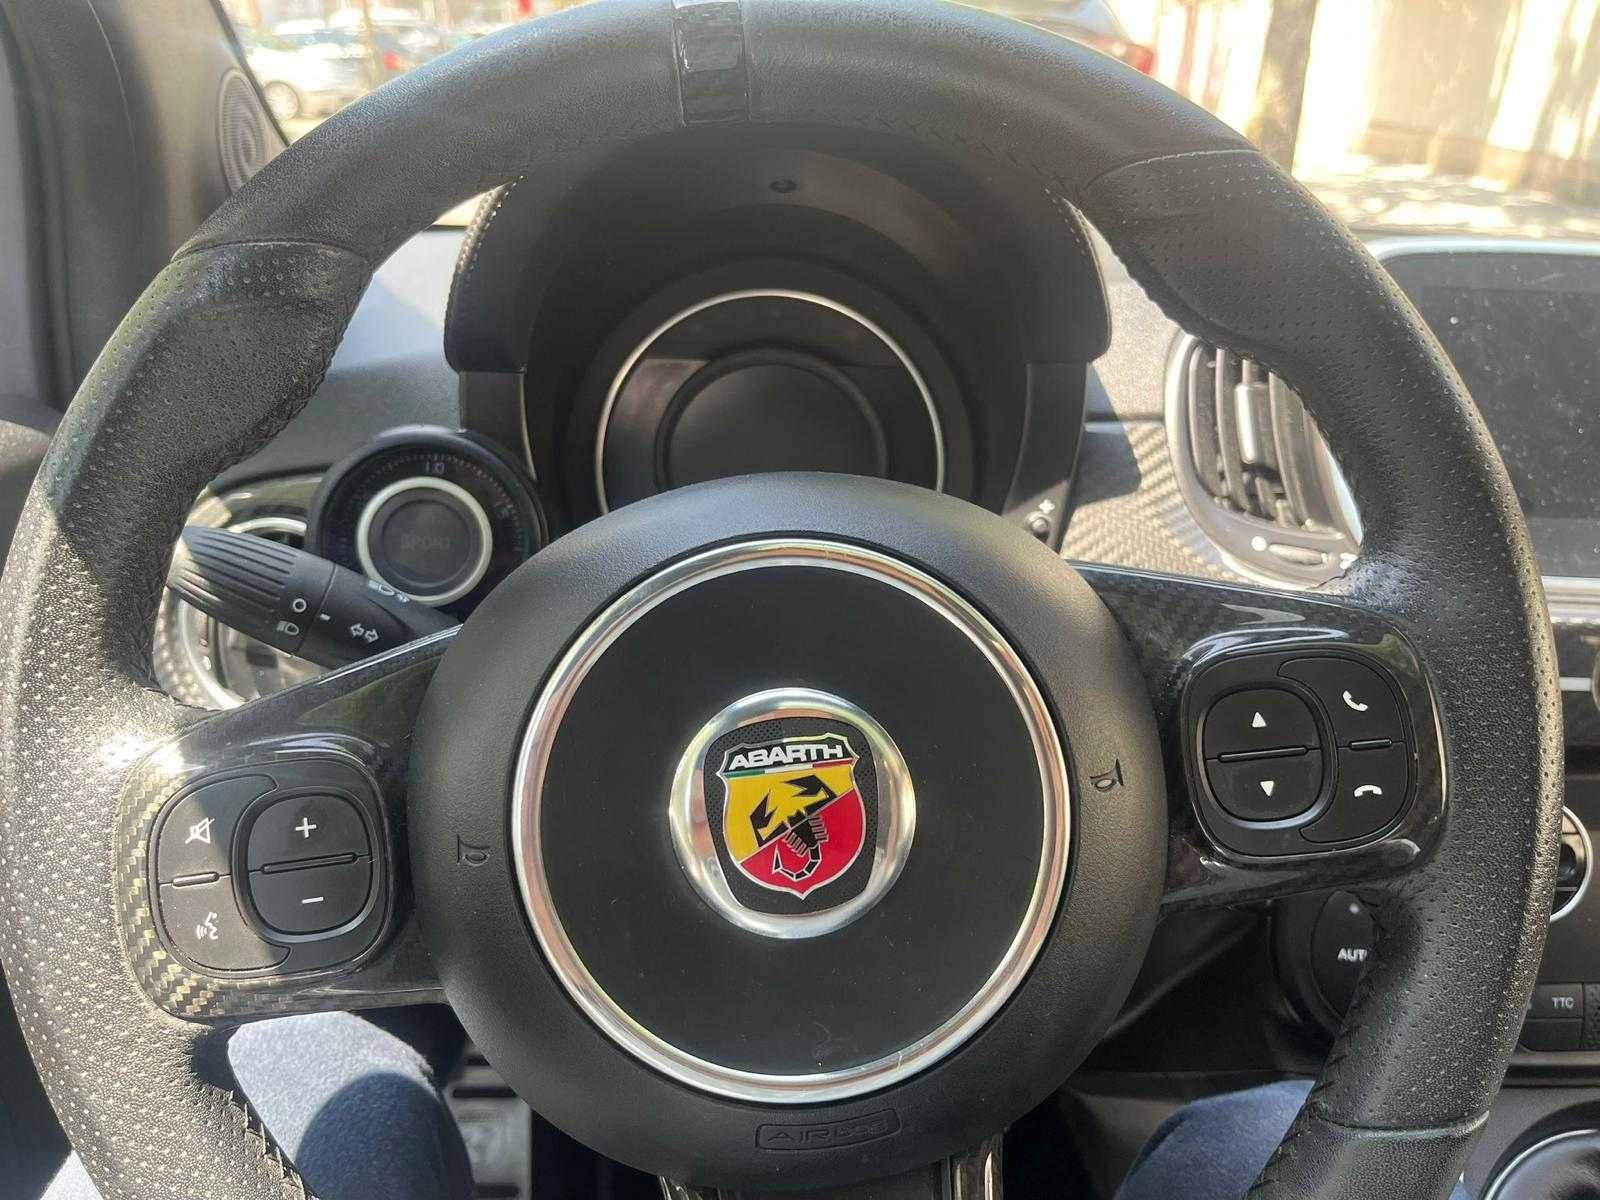 ABARTH 695 RIVALE full extras